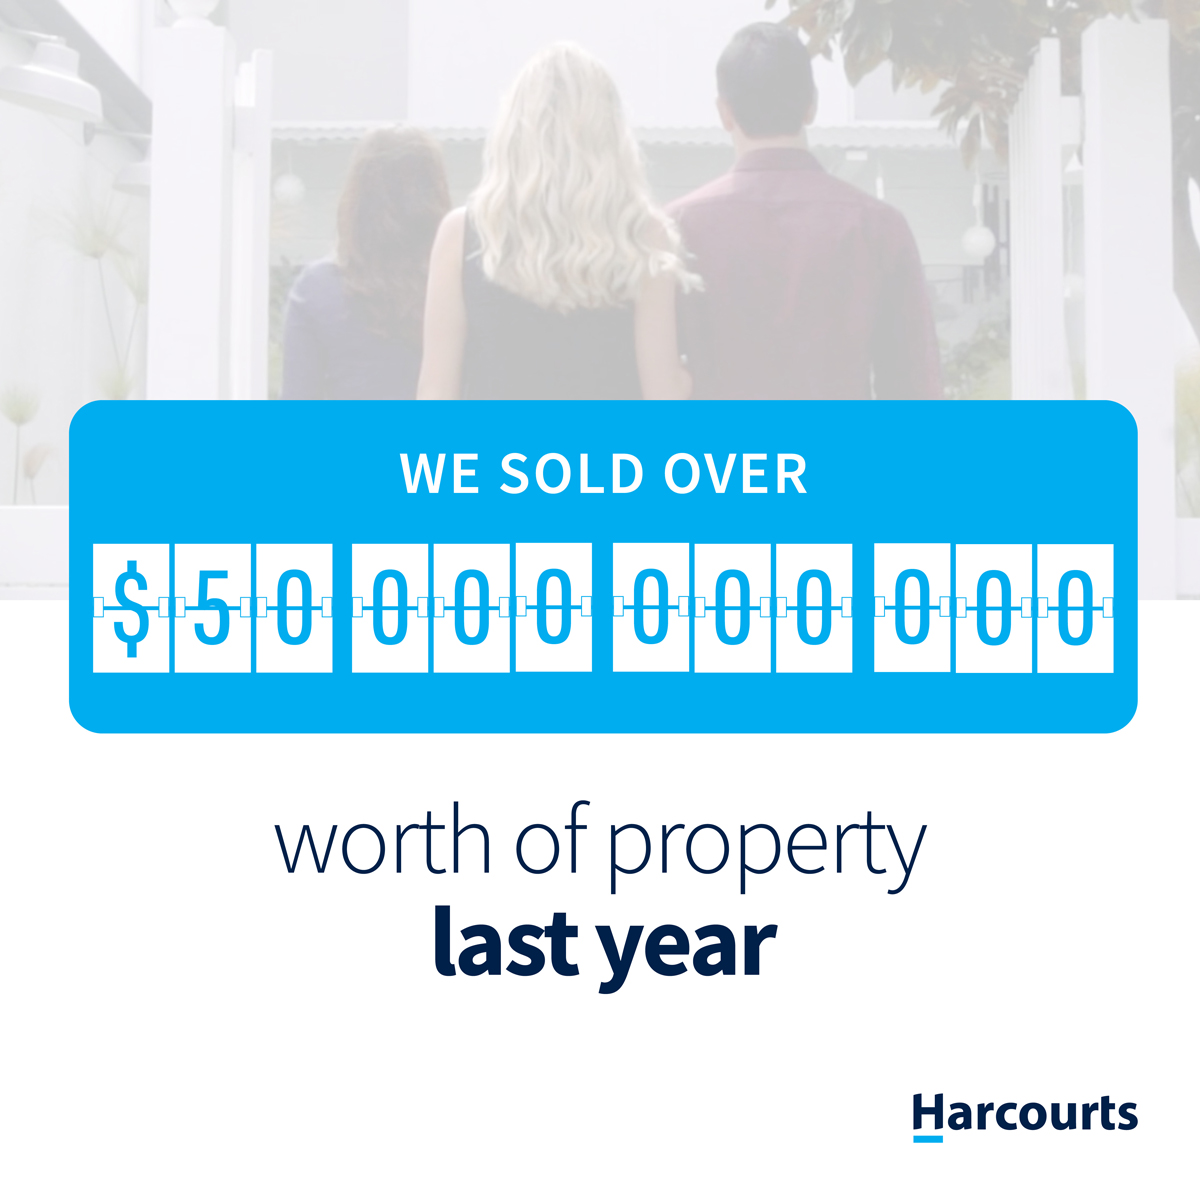 Harcourts sold over 50 Billion dollars worth of property last year.